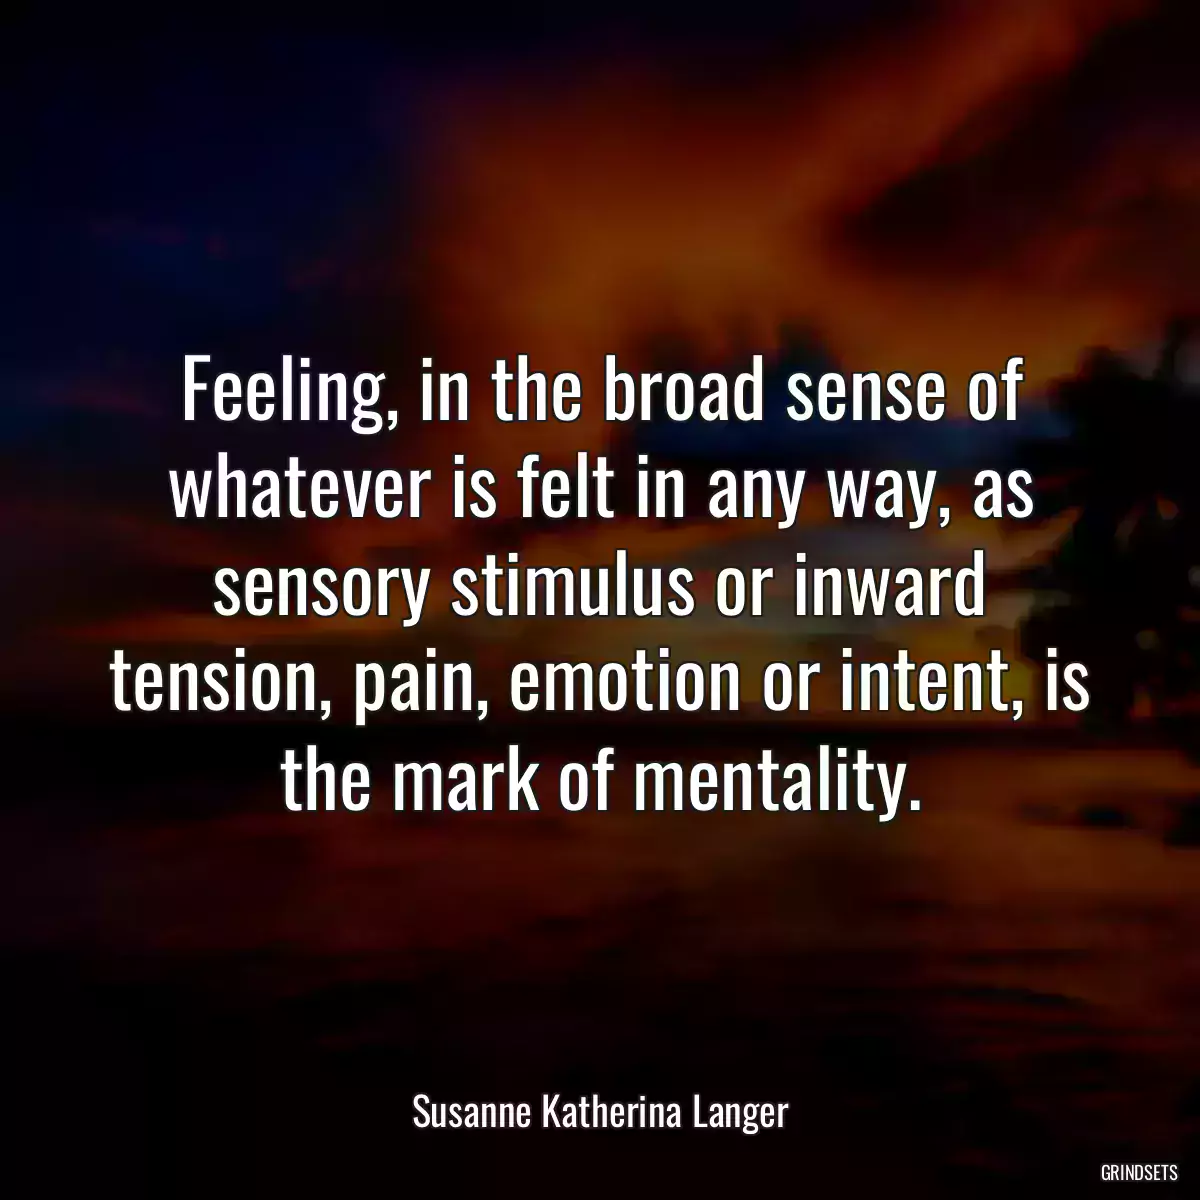 Feeling, in the broad sense of whatever is felt in any way, as sensory stimulus or inward tension, pain, emotion or intent, is the mark of mentality.